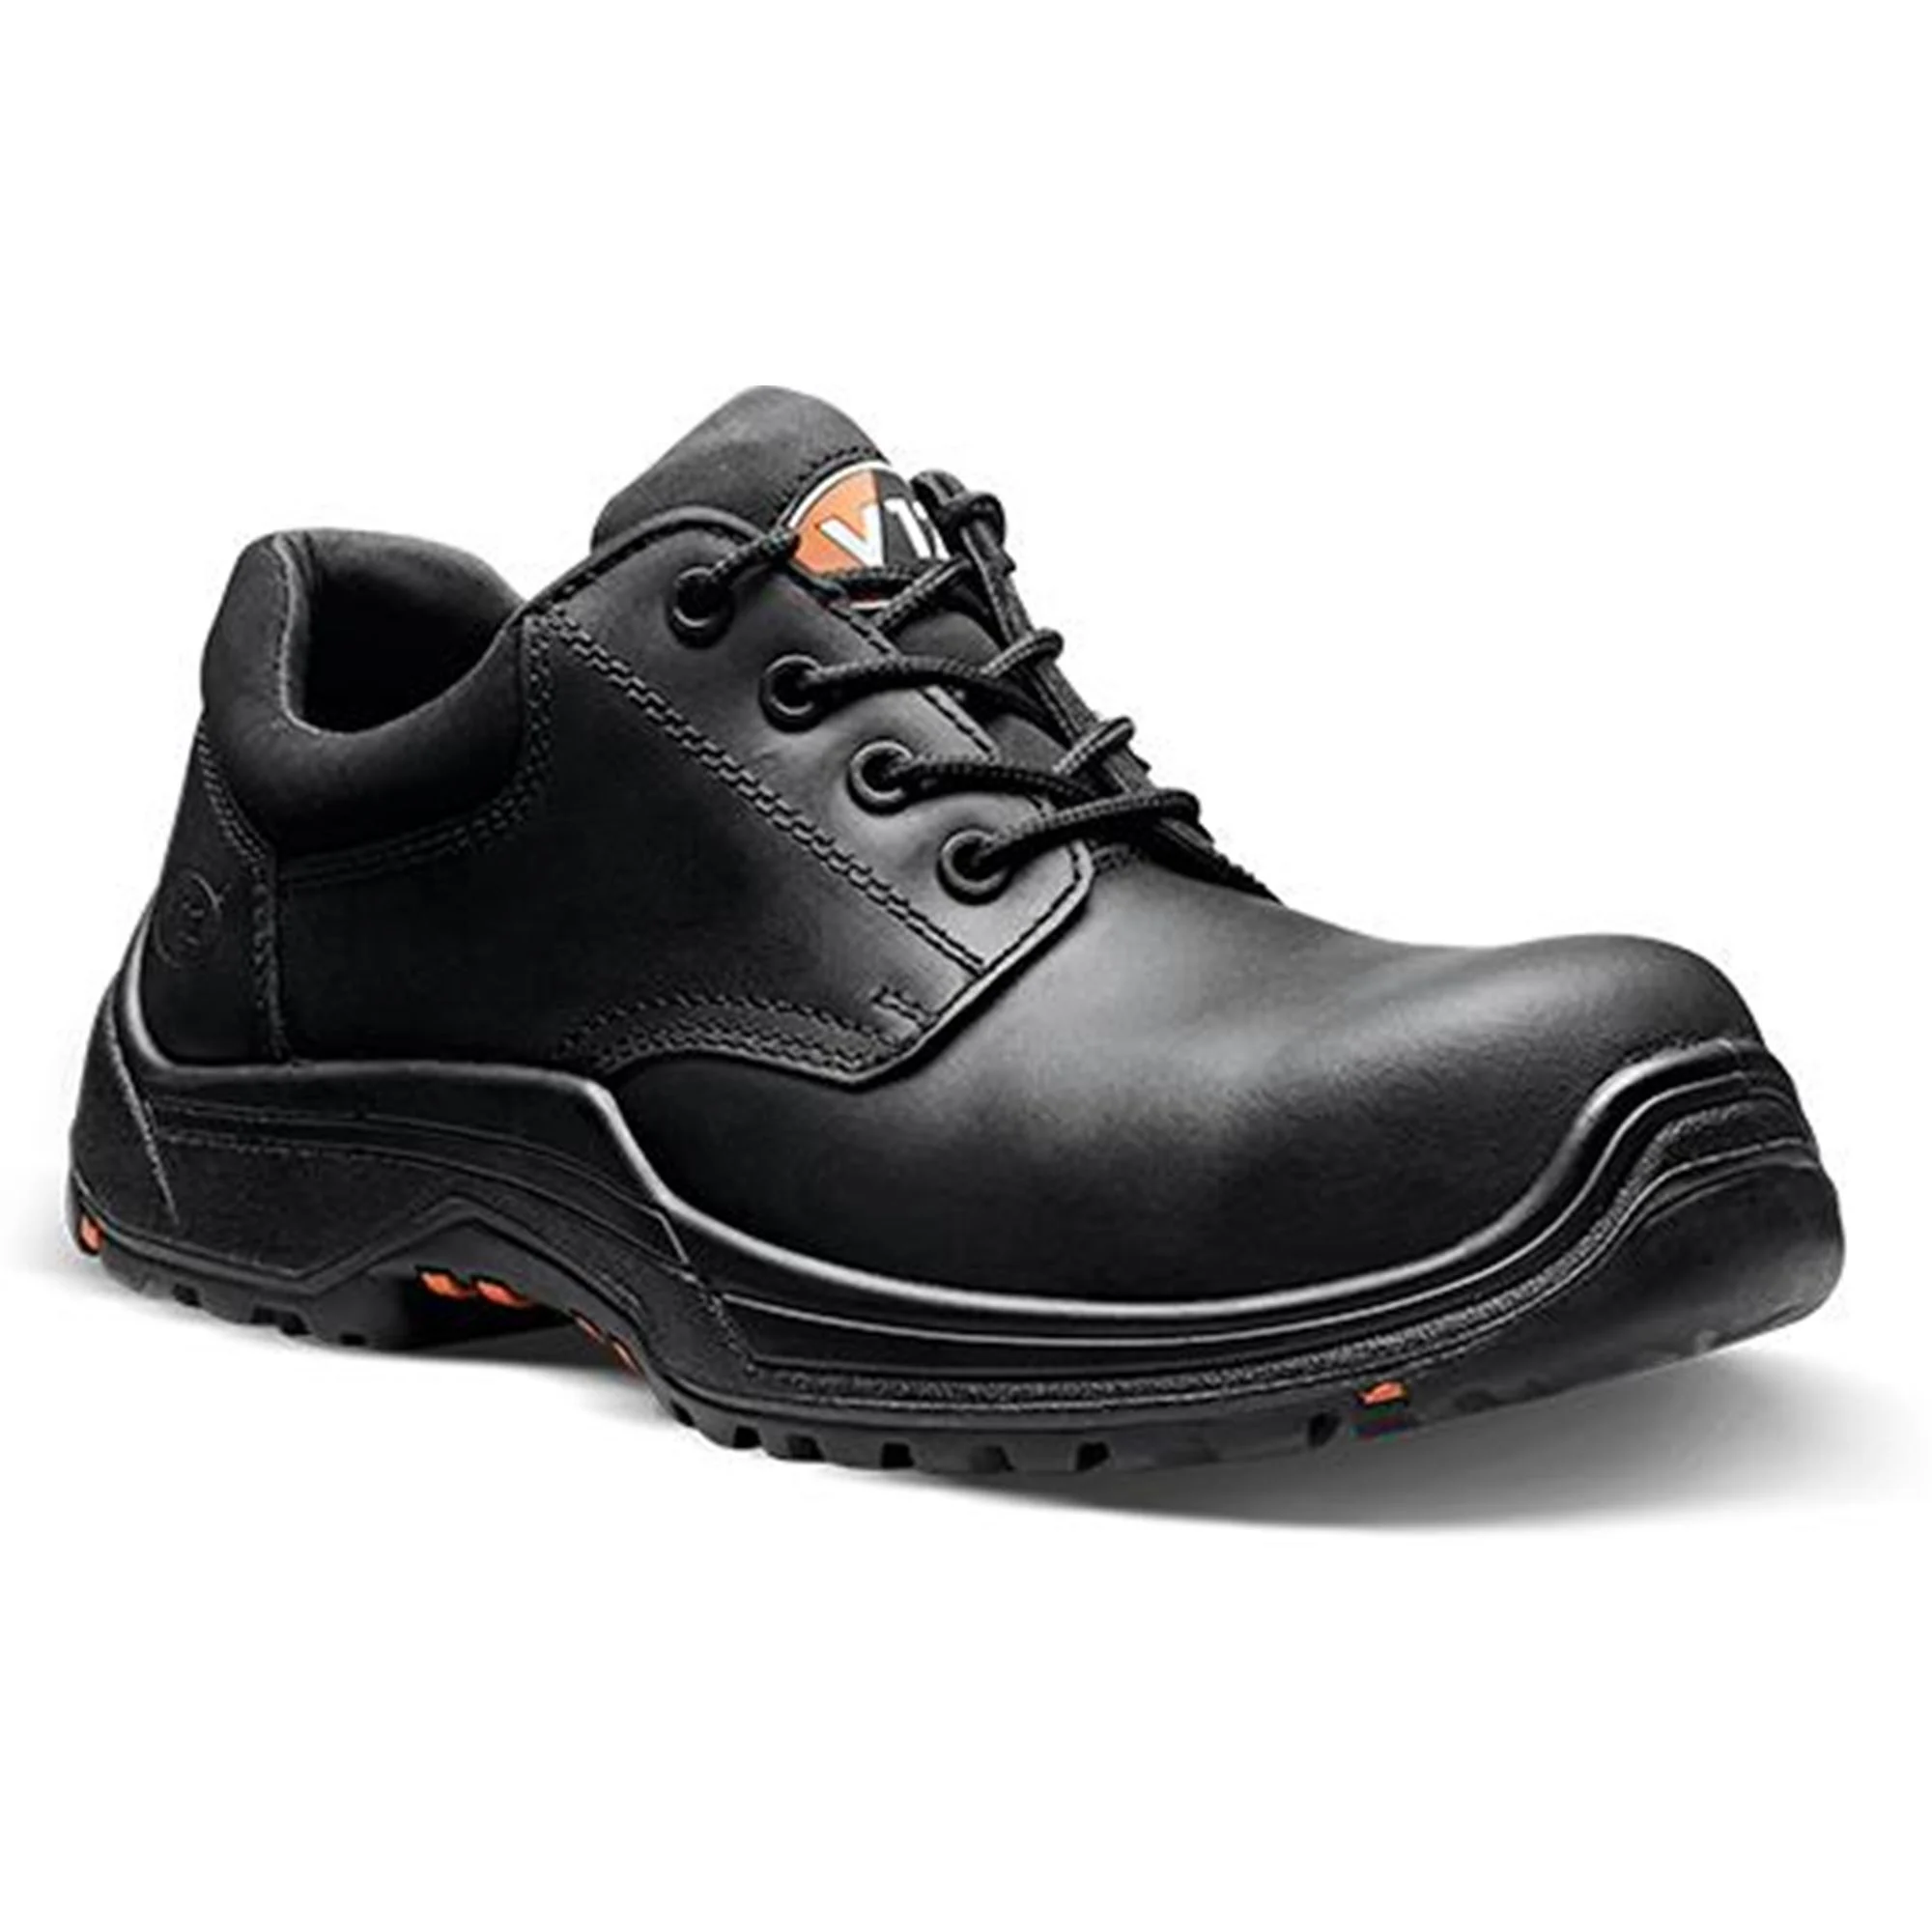 SAFETY SHOES SIZE 39 LOW CUT image 1